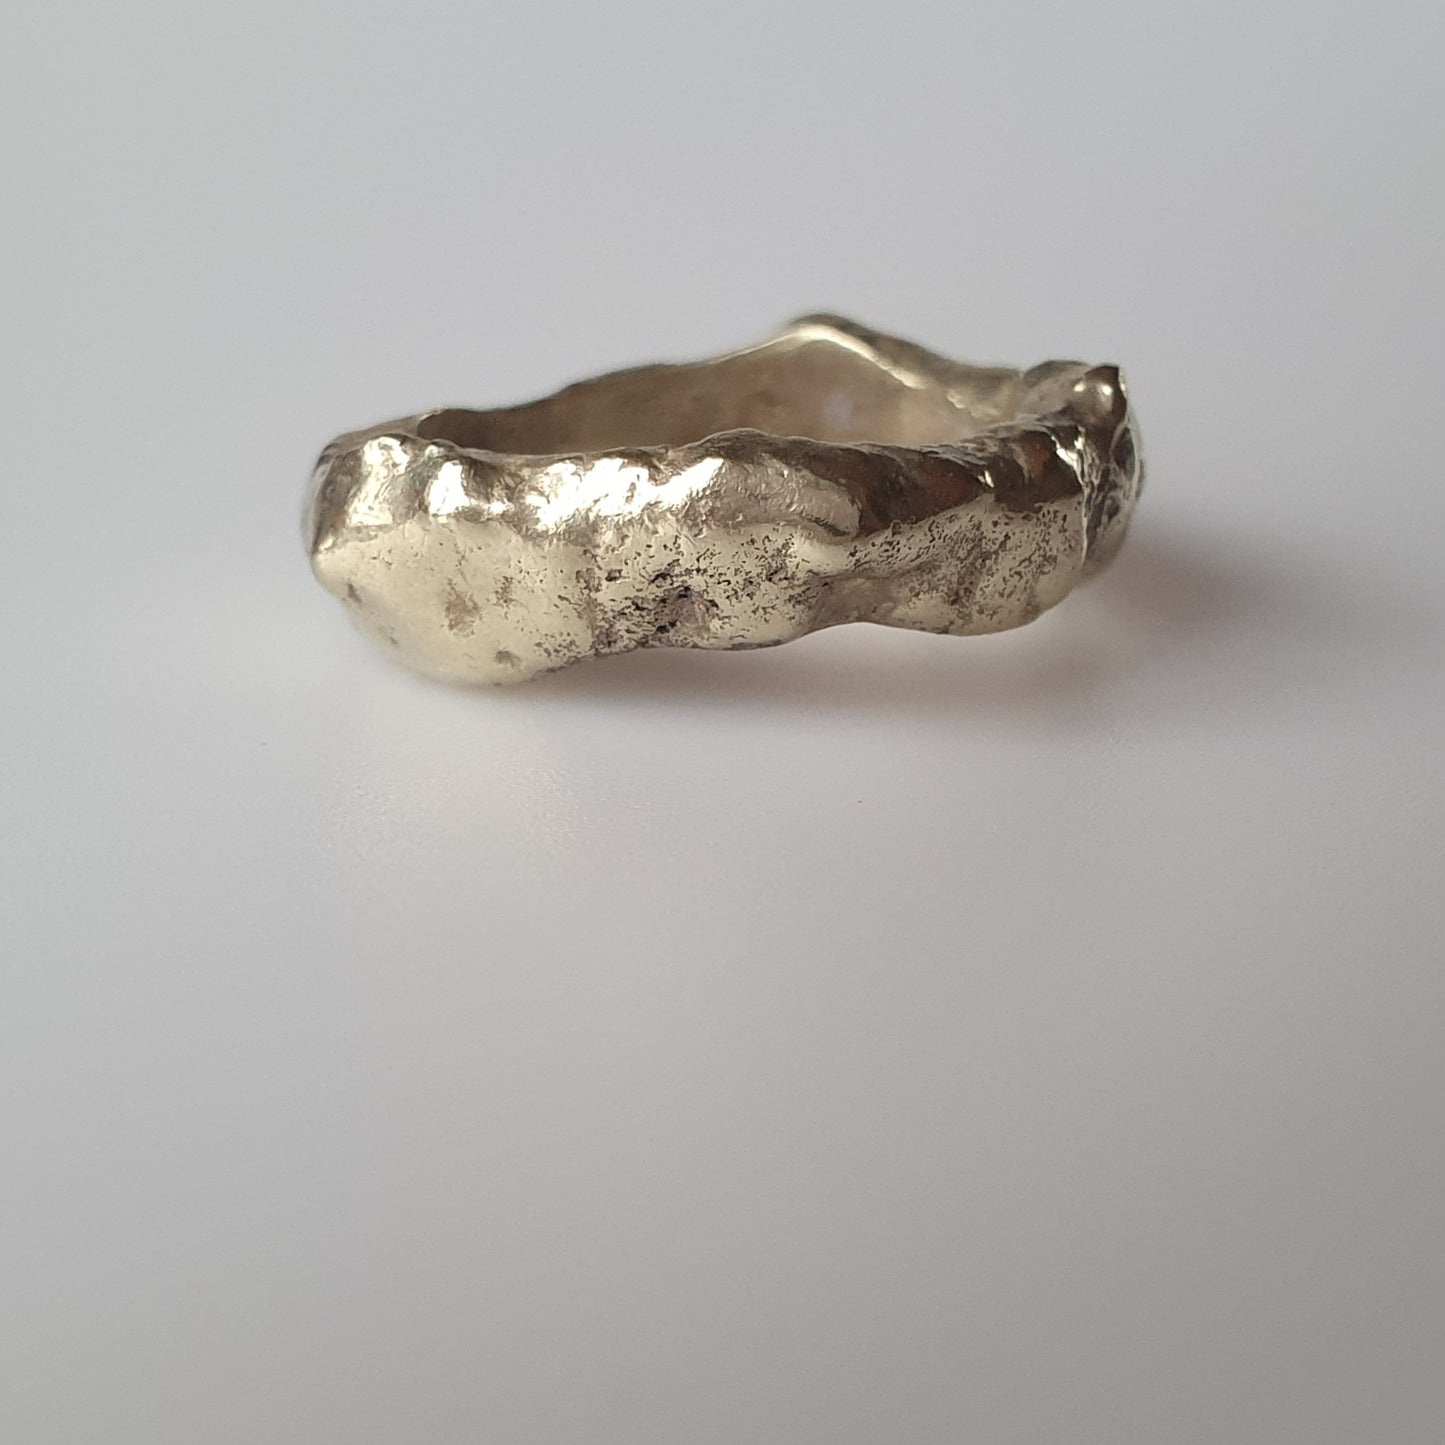 18ct gold plated, Ring, vintage, handmade, jewelry, gifts, unique, statement, stackable, sterling silver, relics, brutalist,punk,rock, gypsy, boho, designer